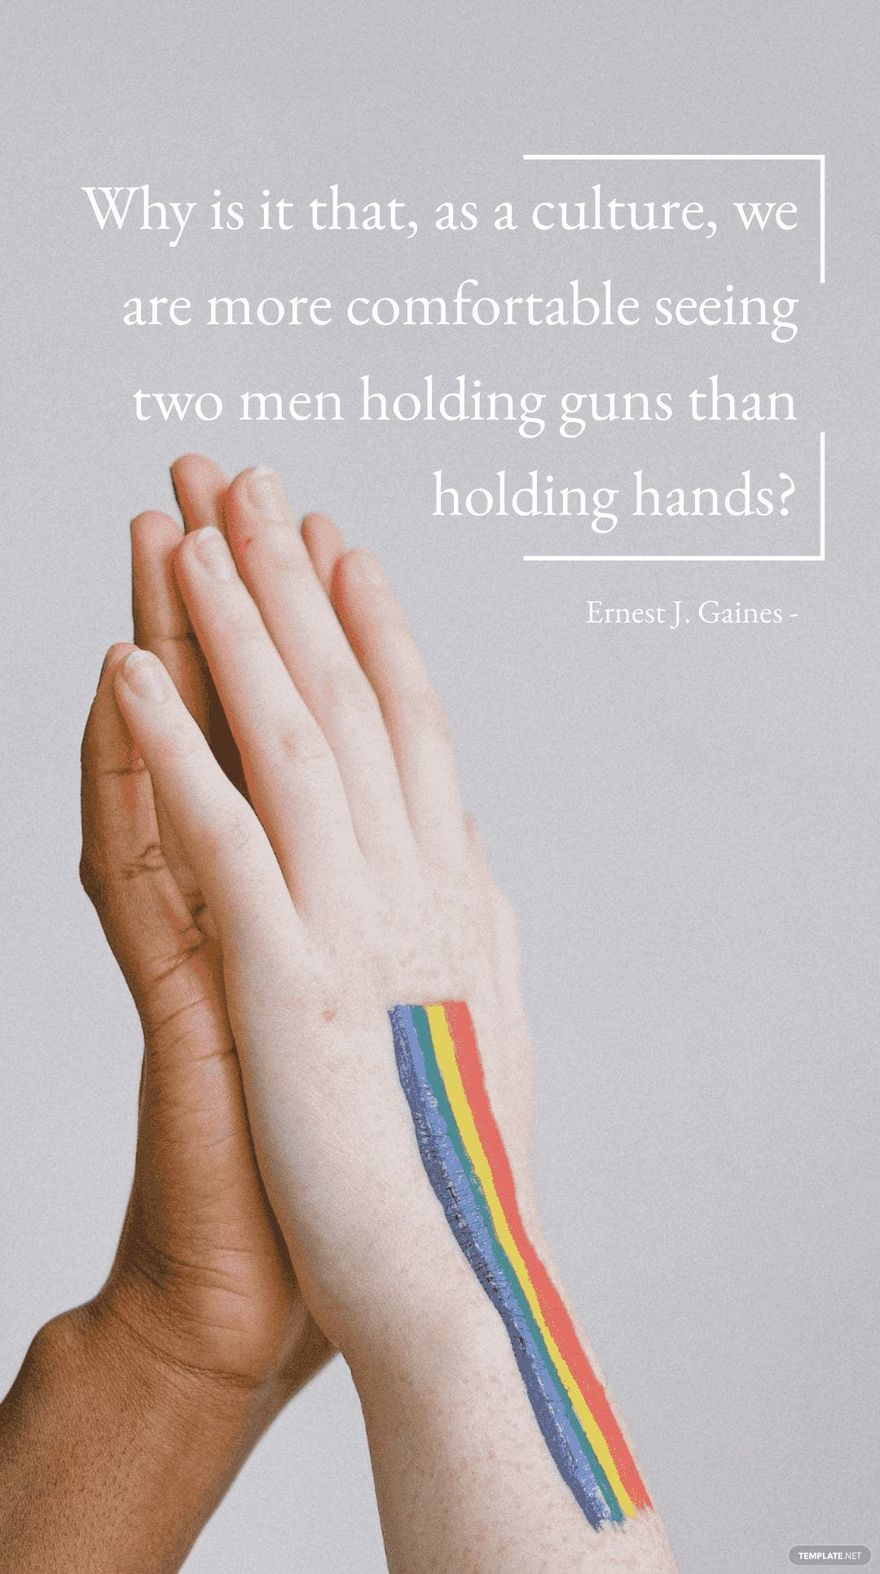 Free Ernest J. Gaines - Why is it that, as a culture, we are more comfortable seeing two men holding guns than holding hands? in JPG